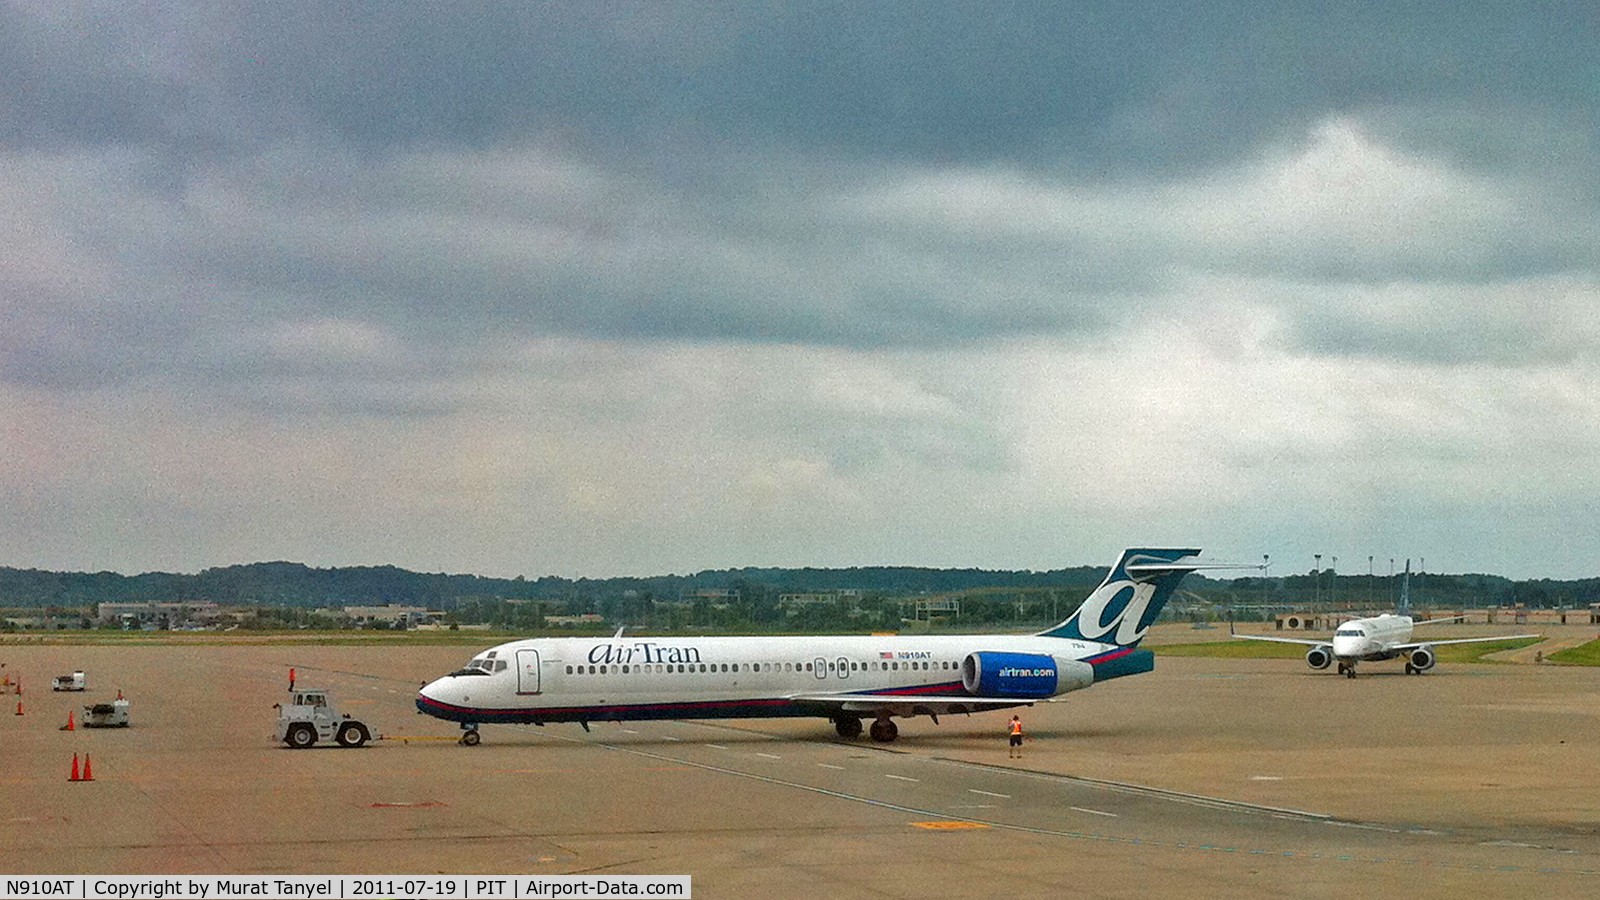 N910AT, 2001 Boeing 717-200 C/N 55086, Pushing back from the terminal @ PIT on 07/19/2011